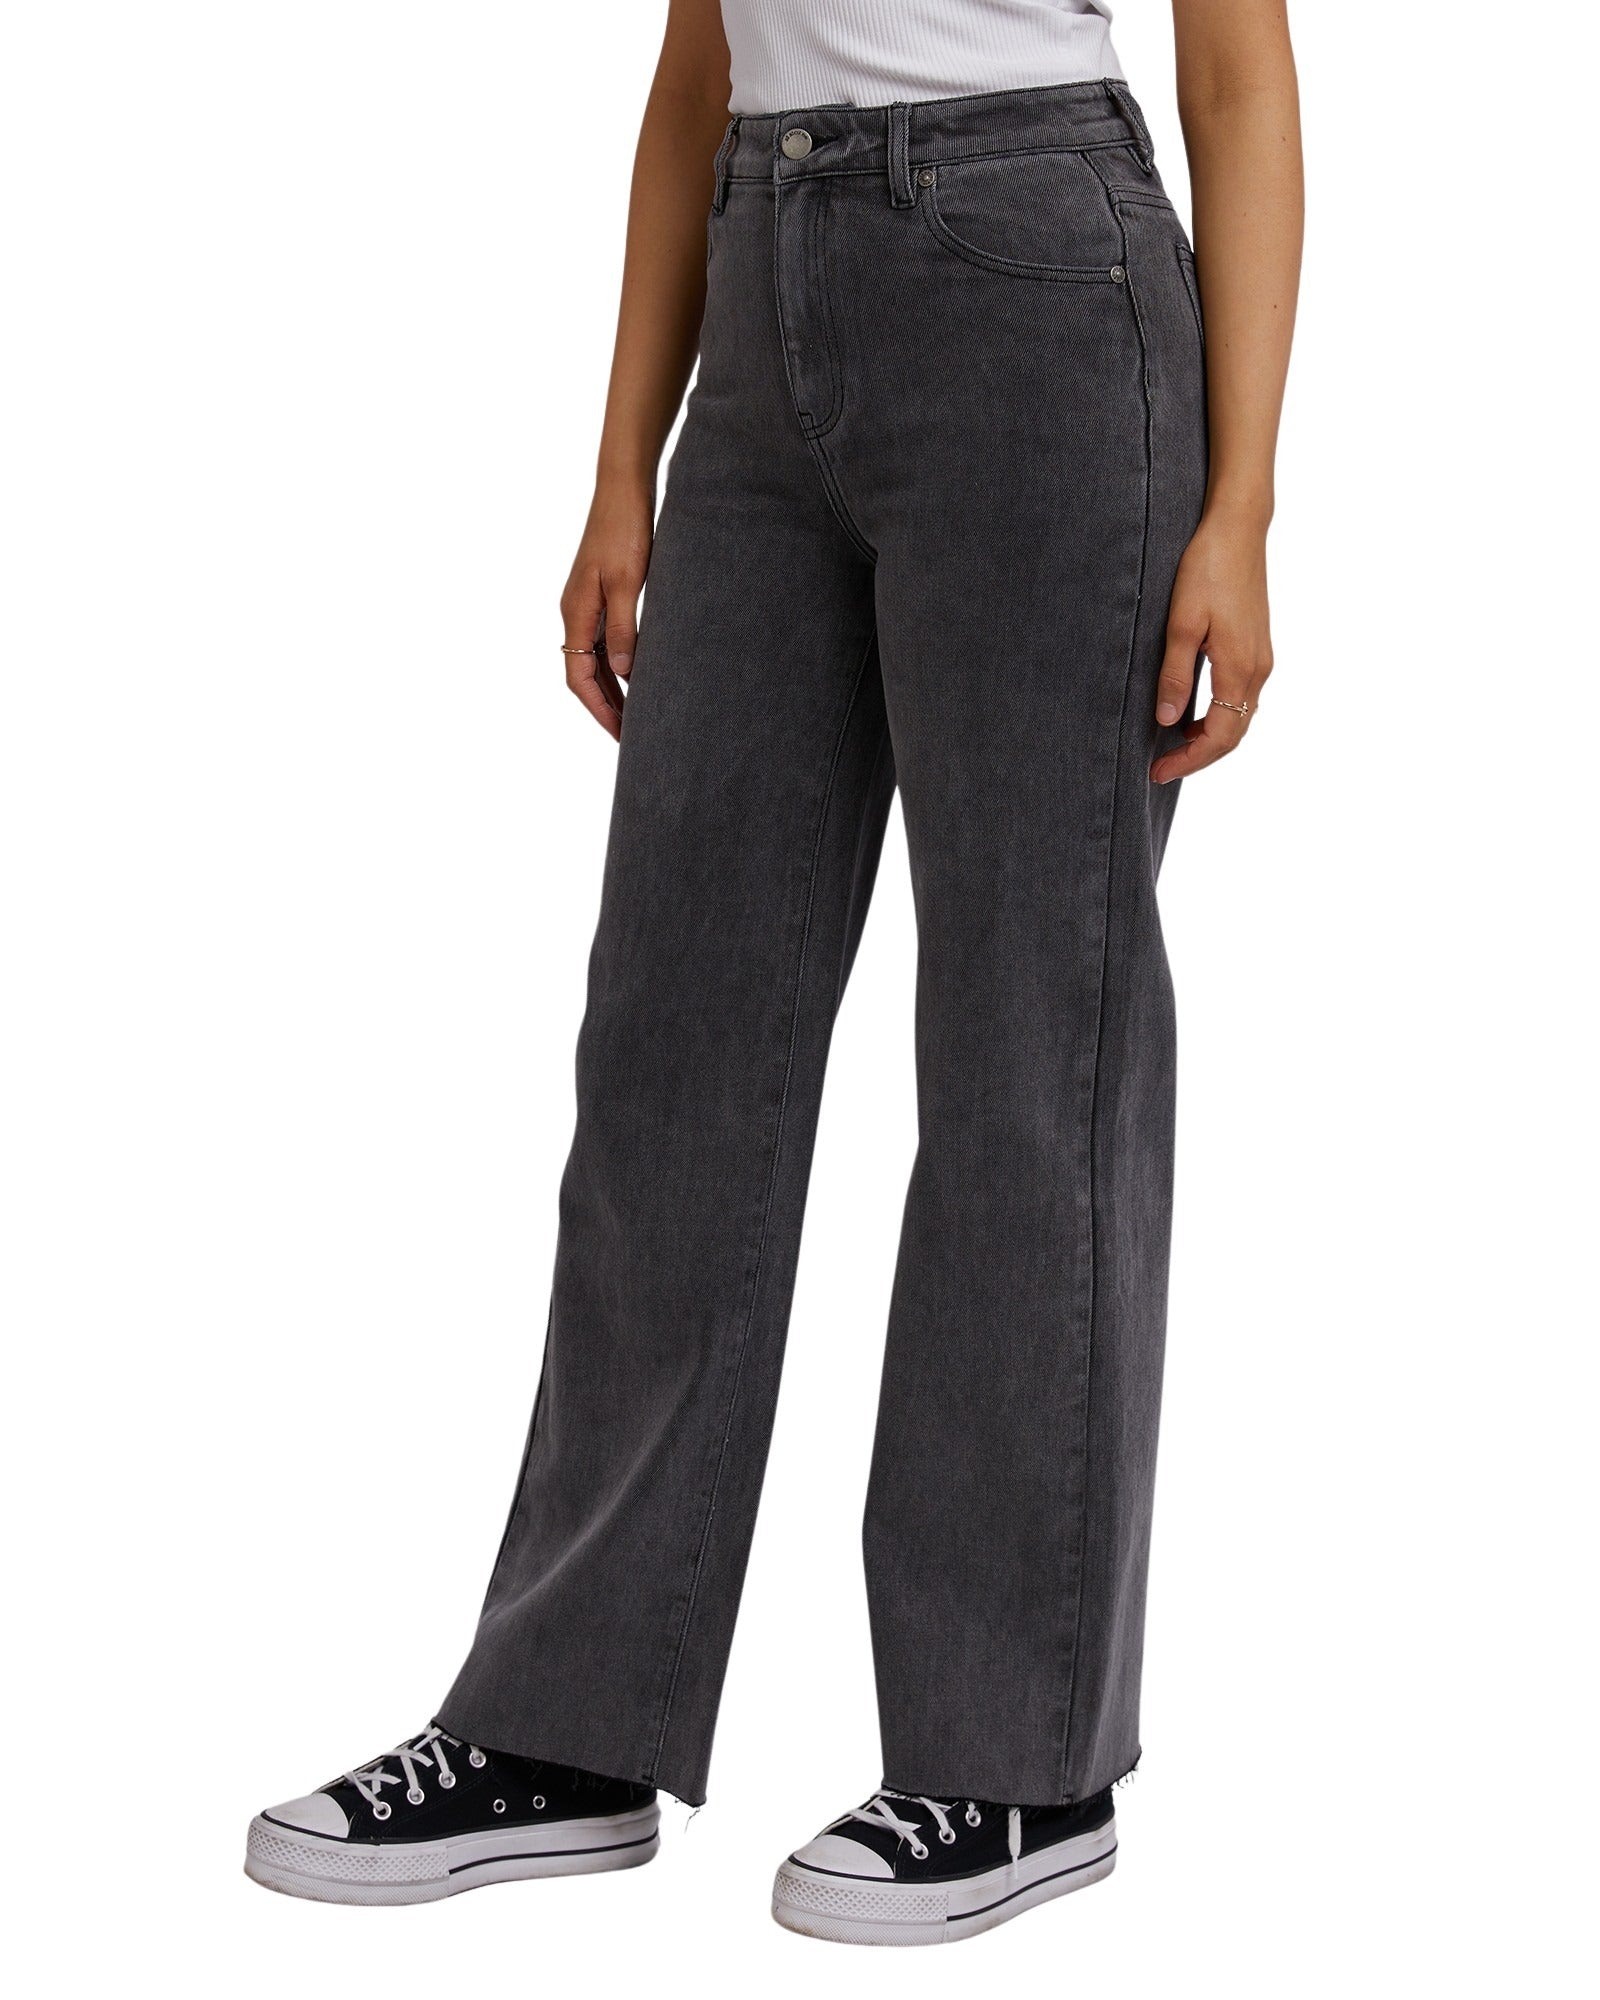 All About Eve - Skye Comfort Jean - Washed Black